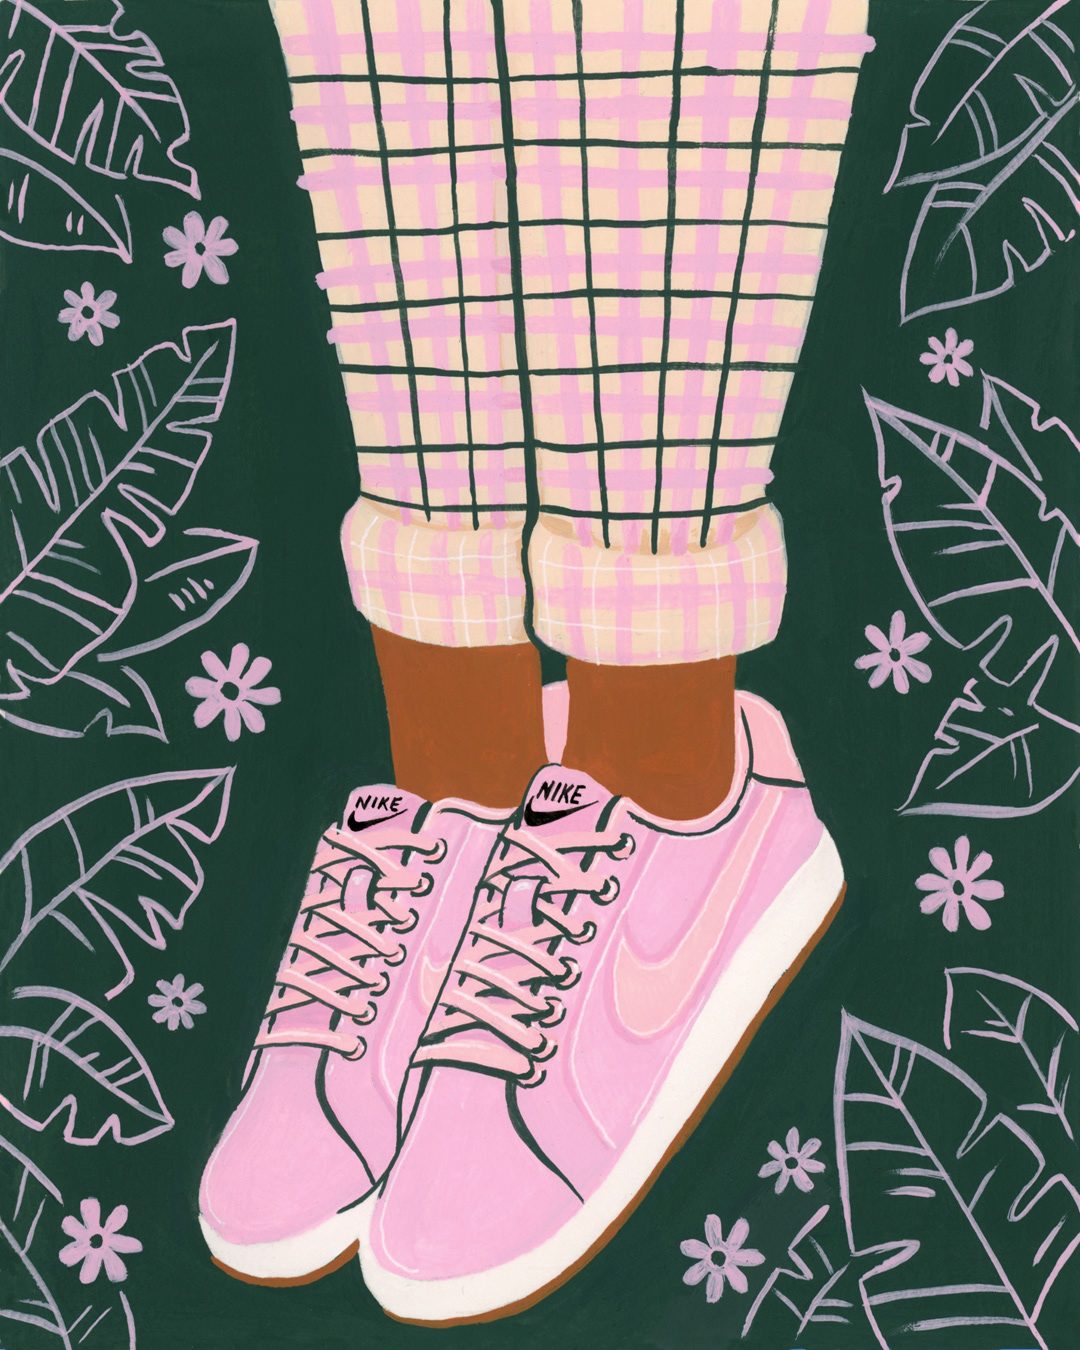 ILLUSTRATION  sneakers fashion illustration painting   Drawing  Illustrator Zappos the_ones shoes